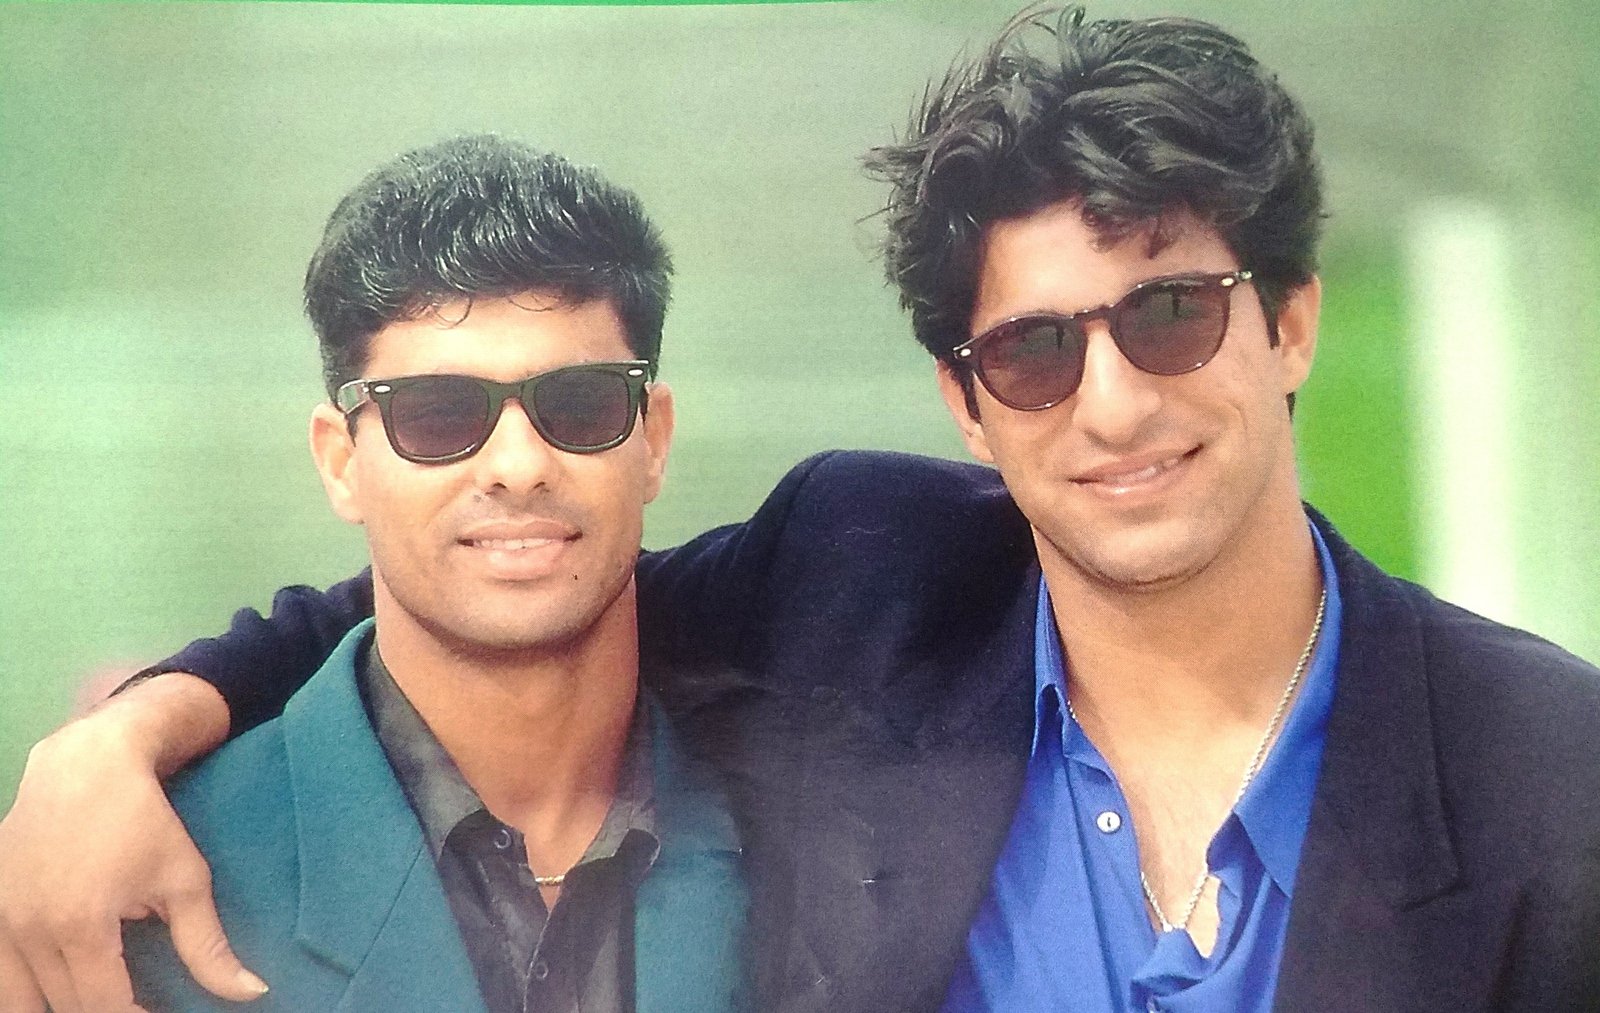 Wasim and Waqar working in tandem will remain one great picture to cherish.